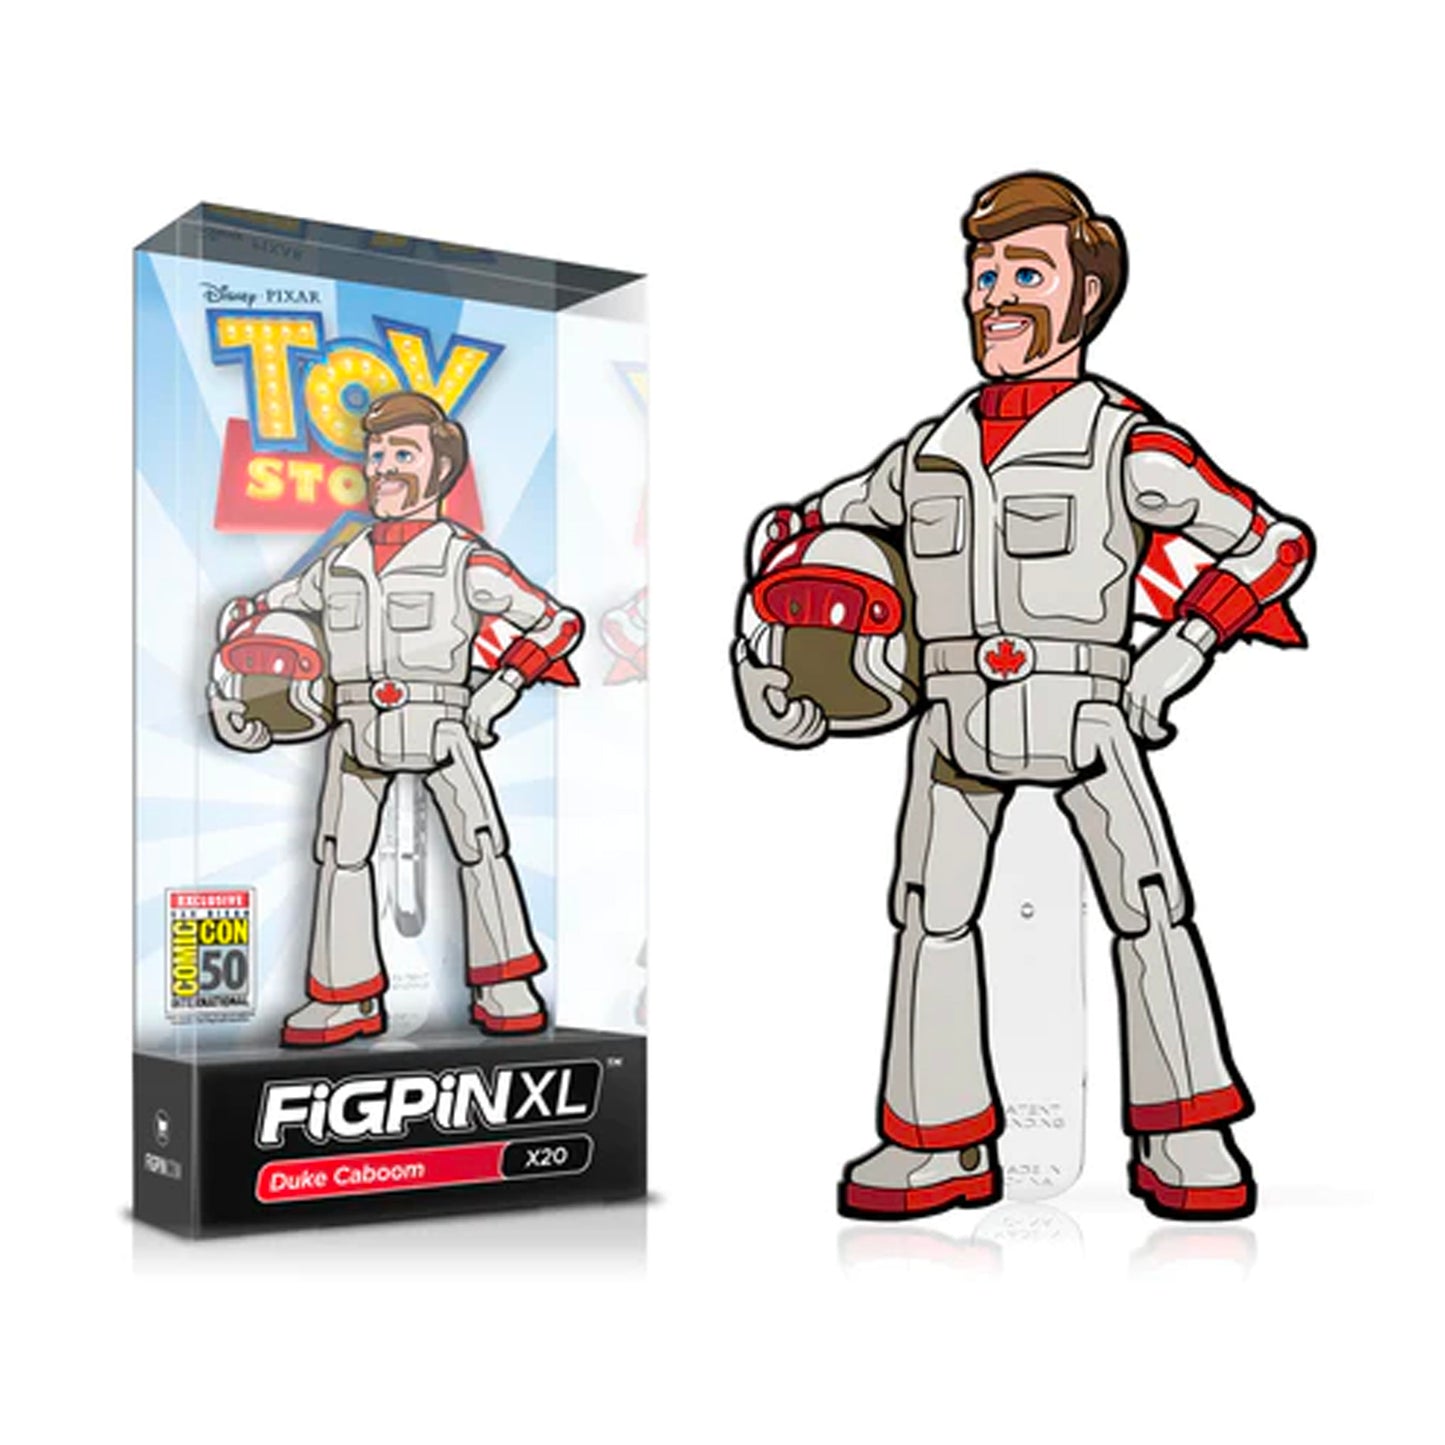 FiGPiN: Toy Story 4 - Duke Caboom #X20 XL SDCC 2019 Exclusive